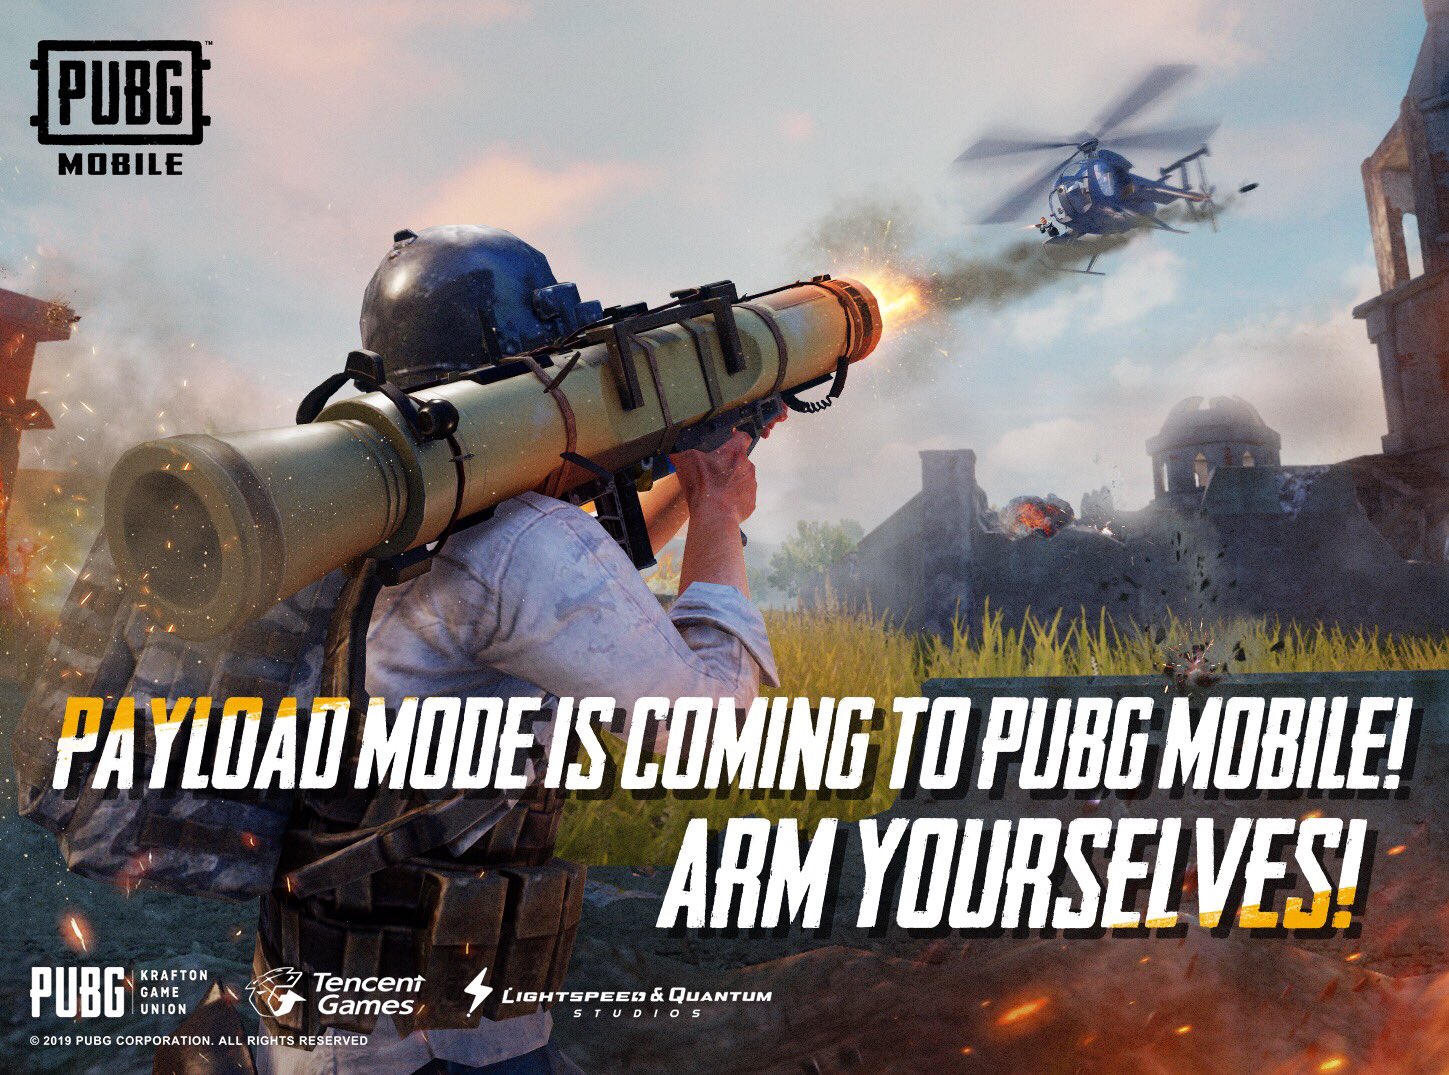 pubg-mobile-payload-mode